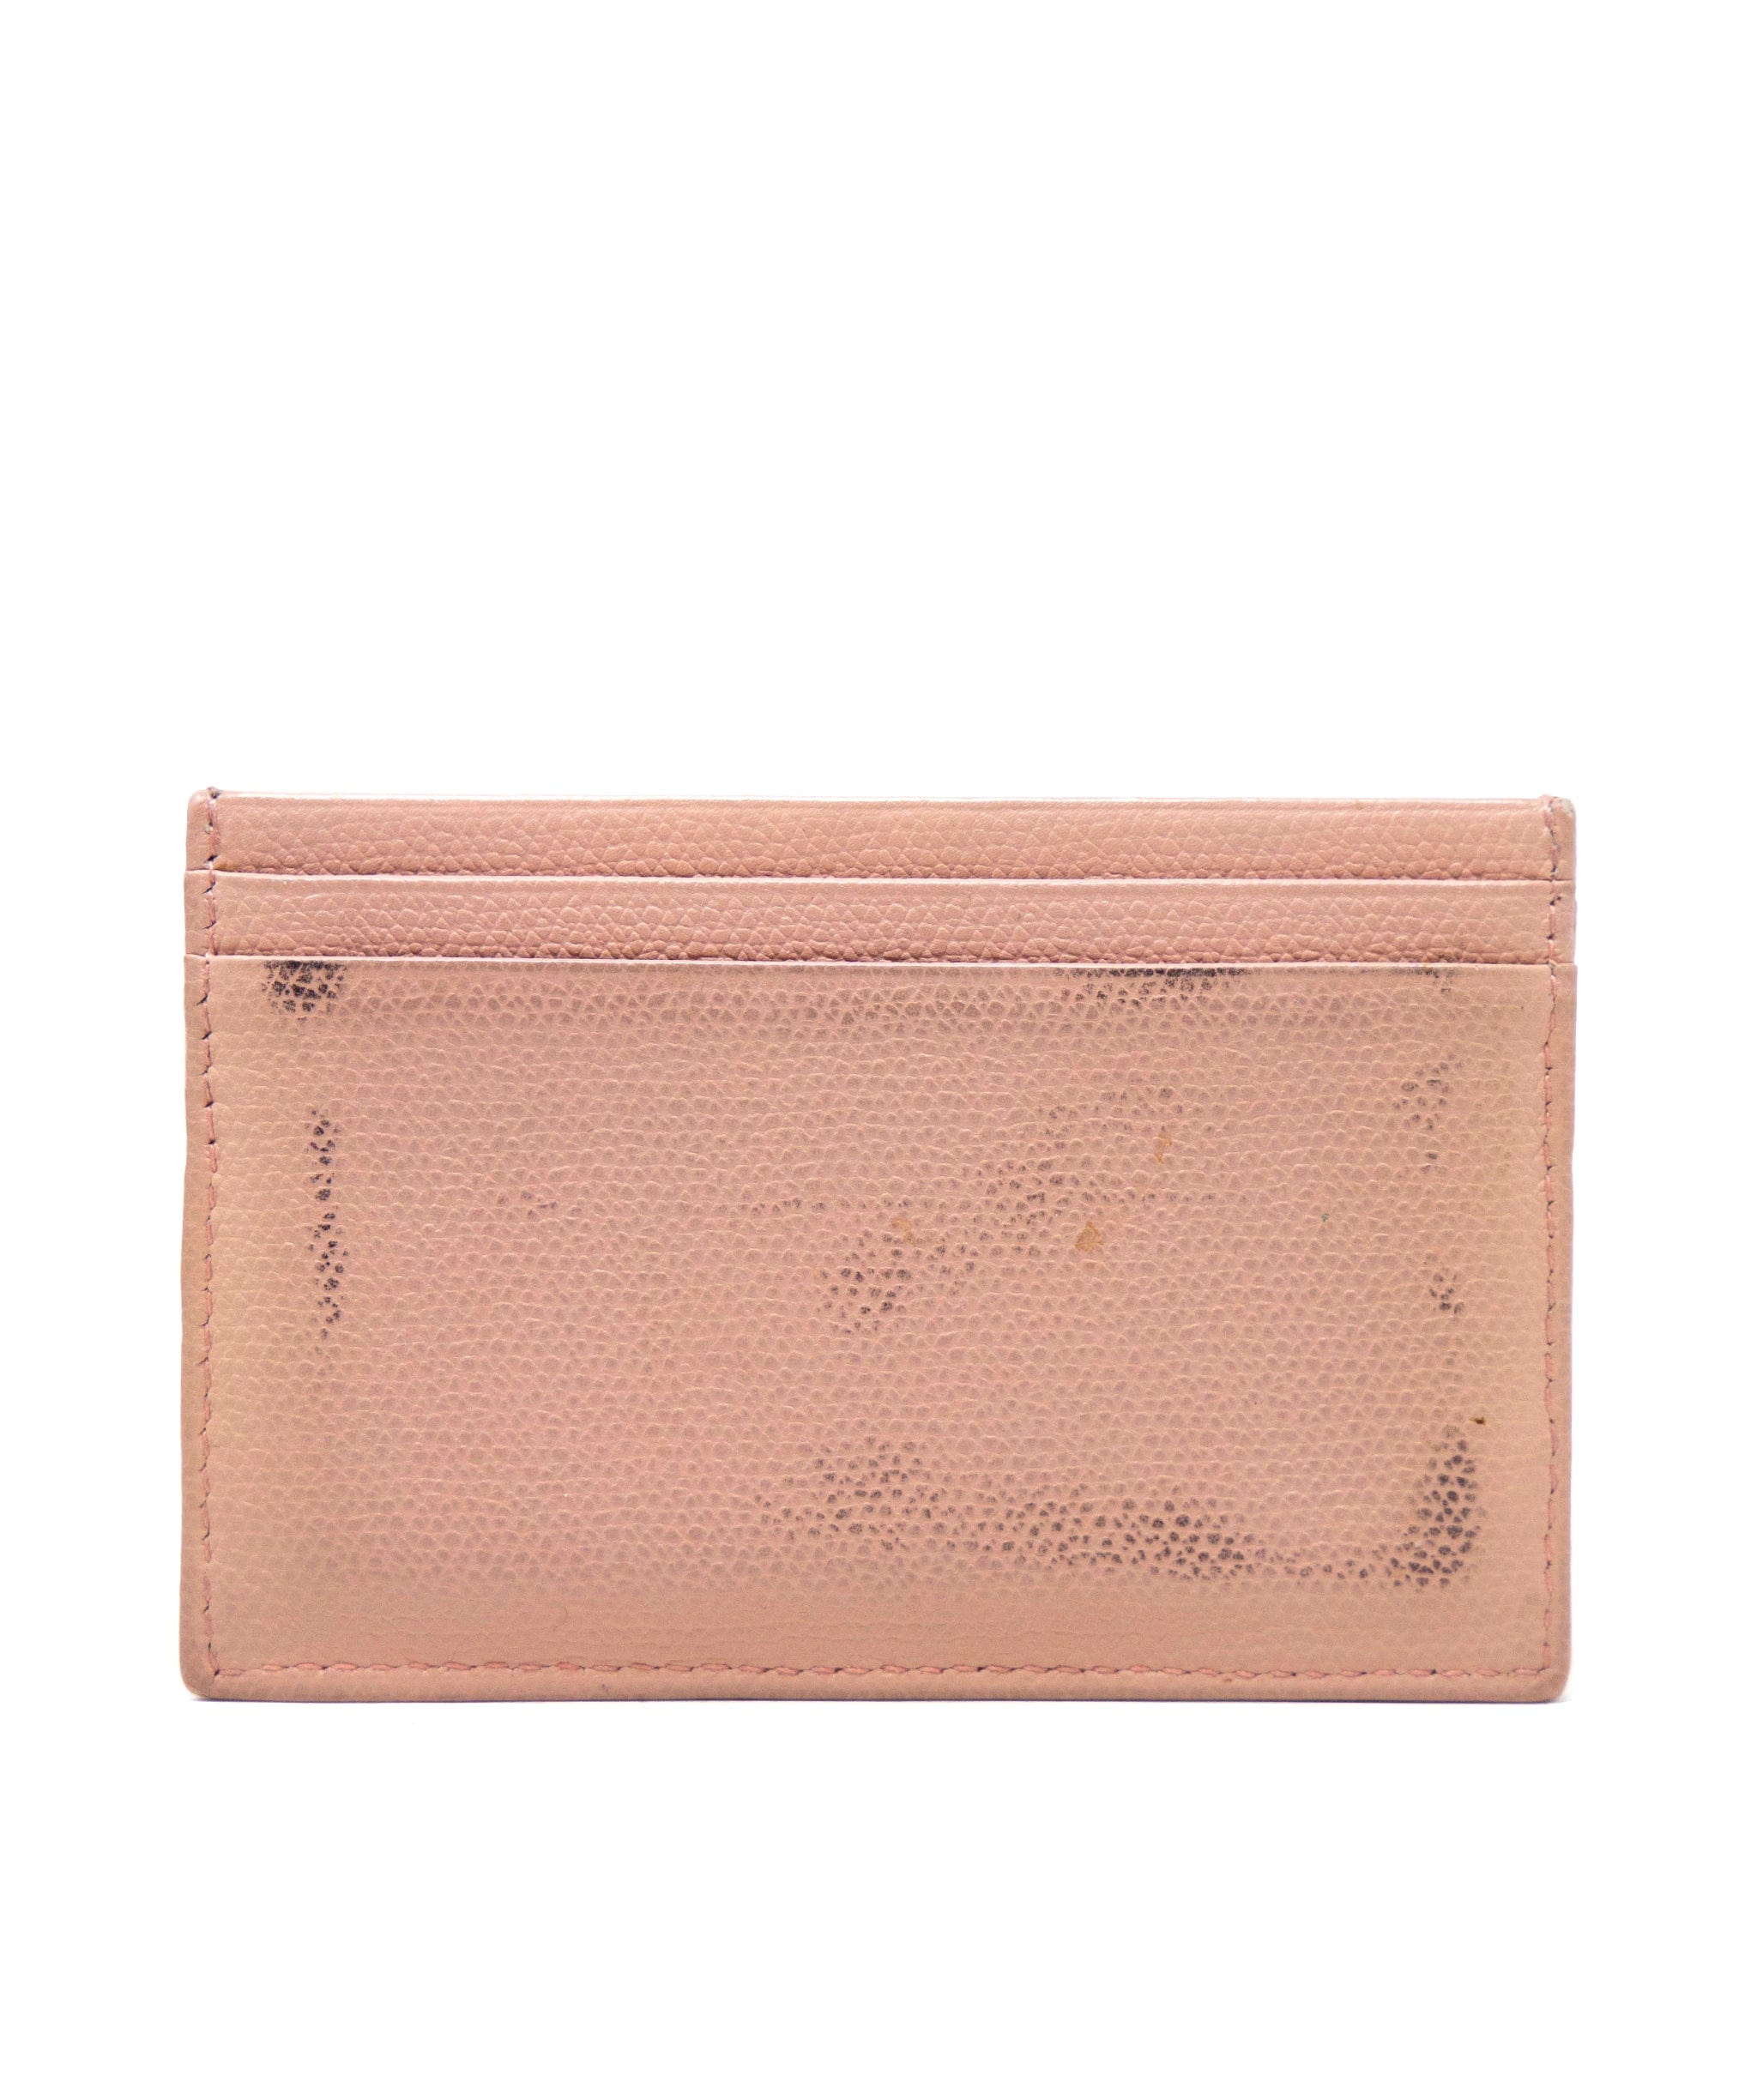 Chanel Pink Leather CC Card Holder AGC1156